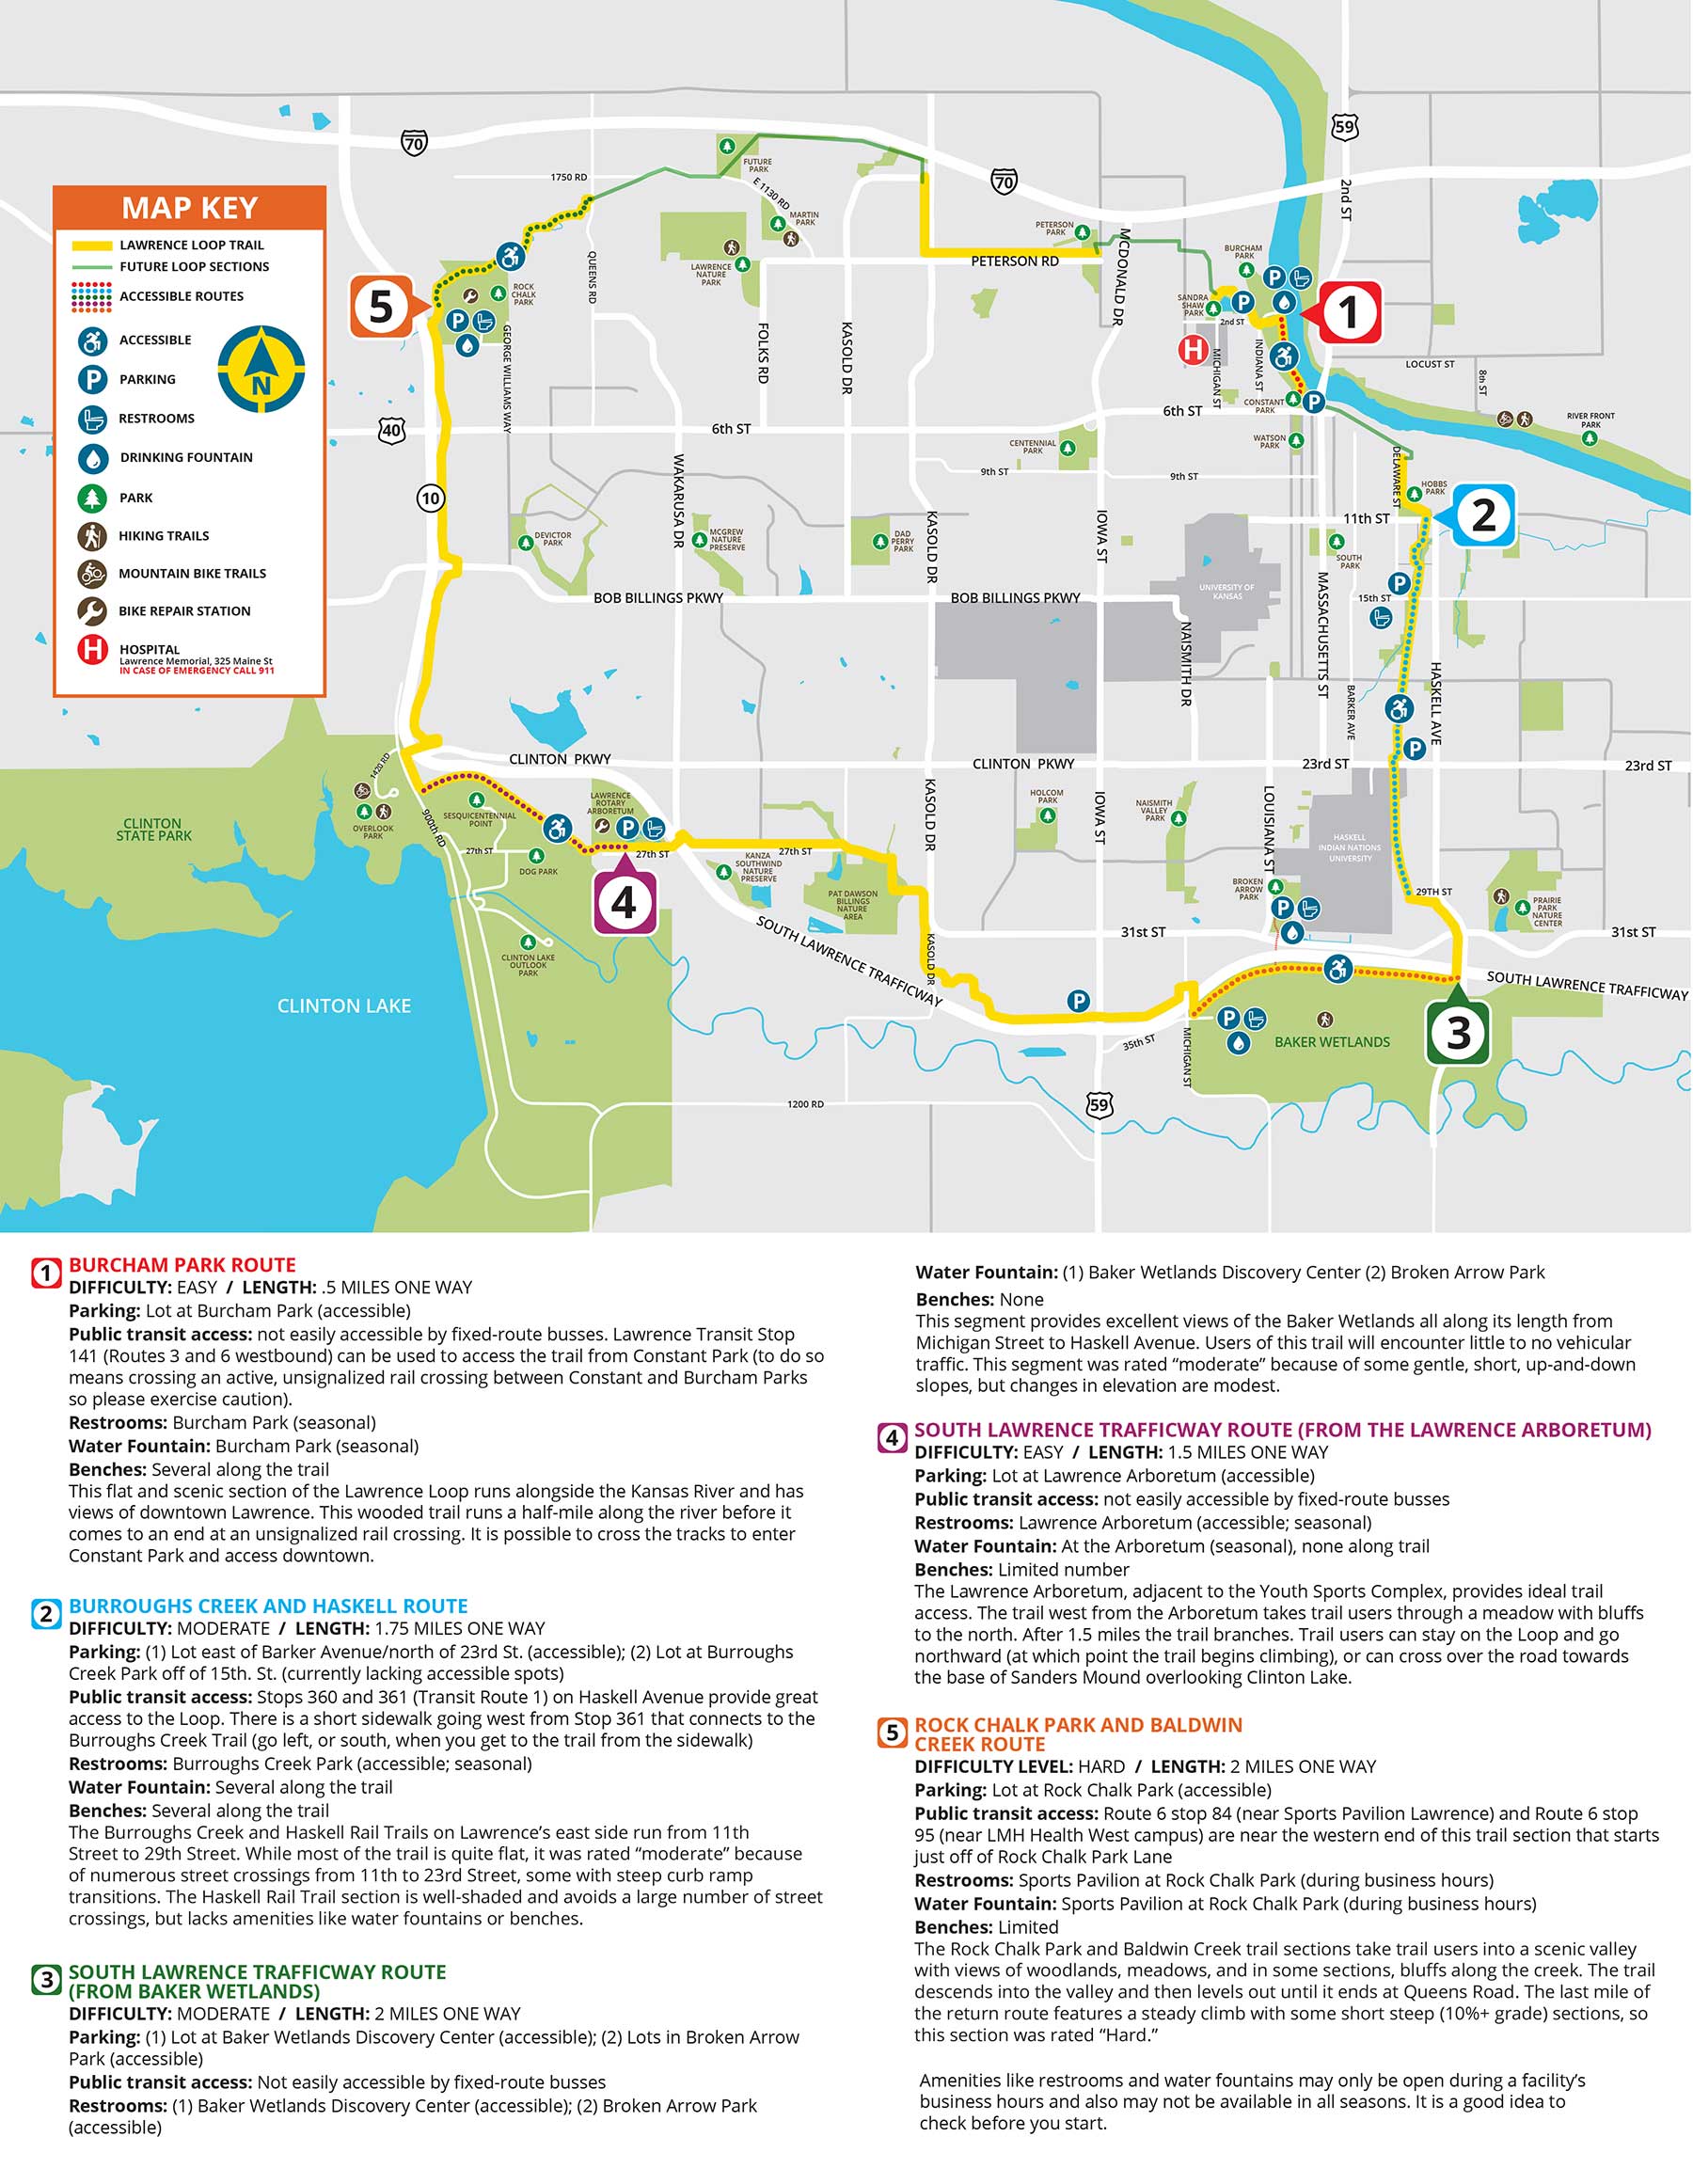 Lawrence Loop Accessible Routes